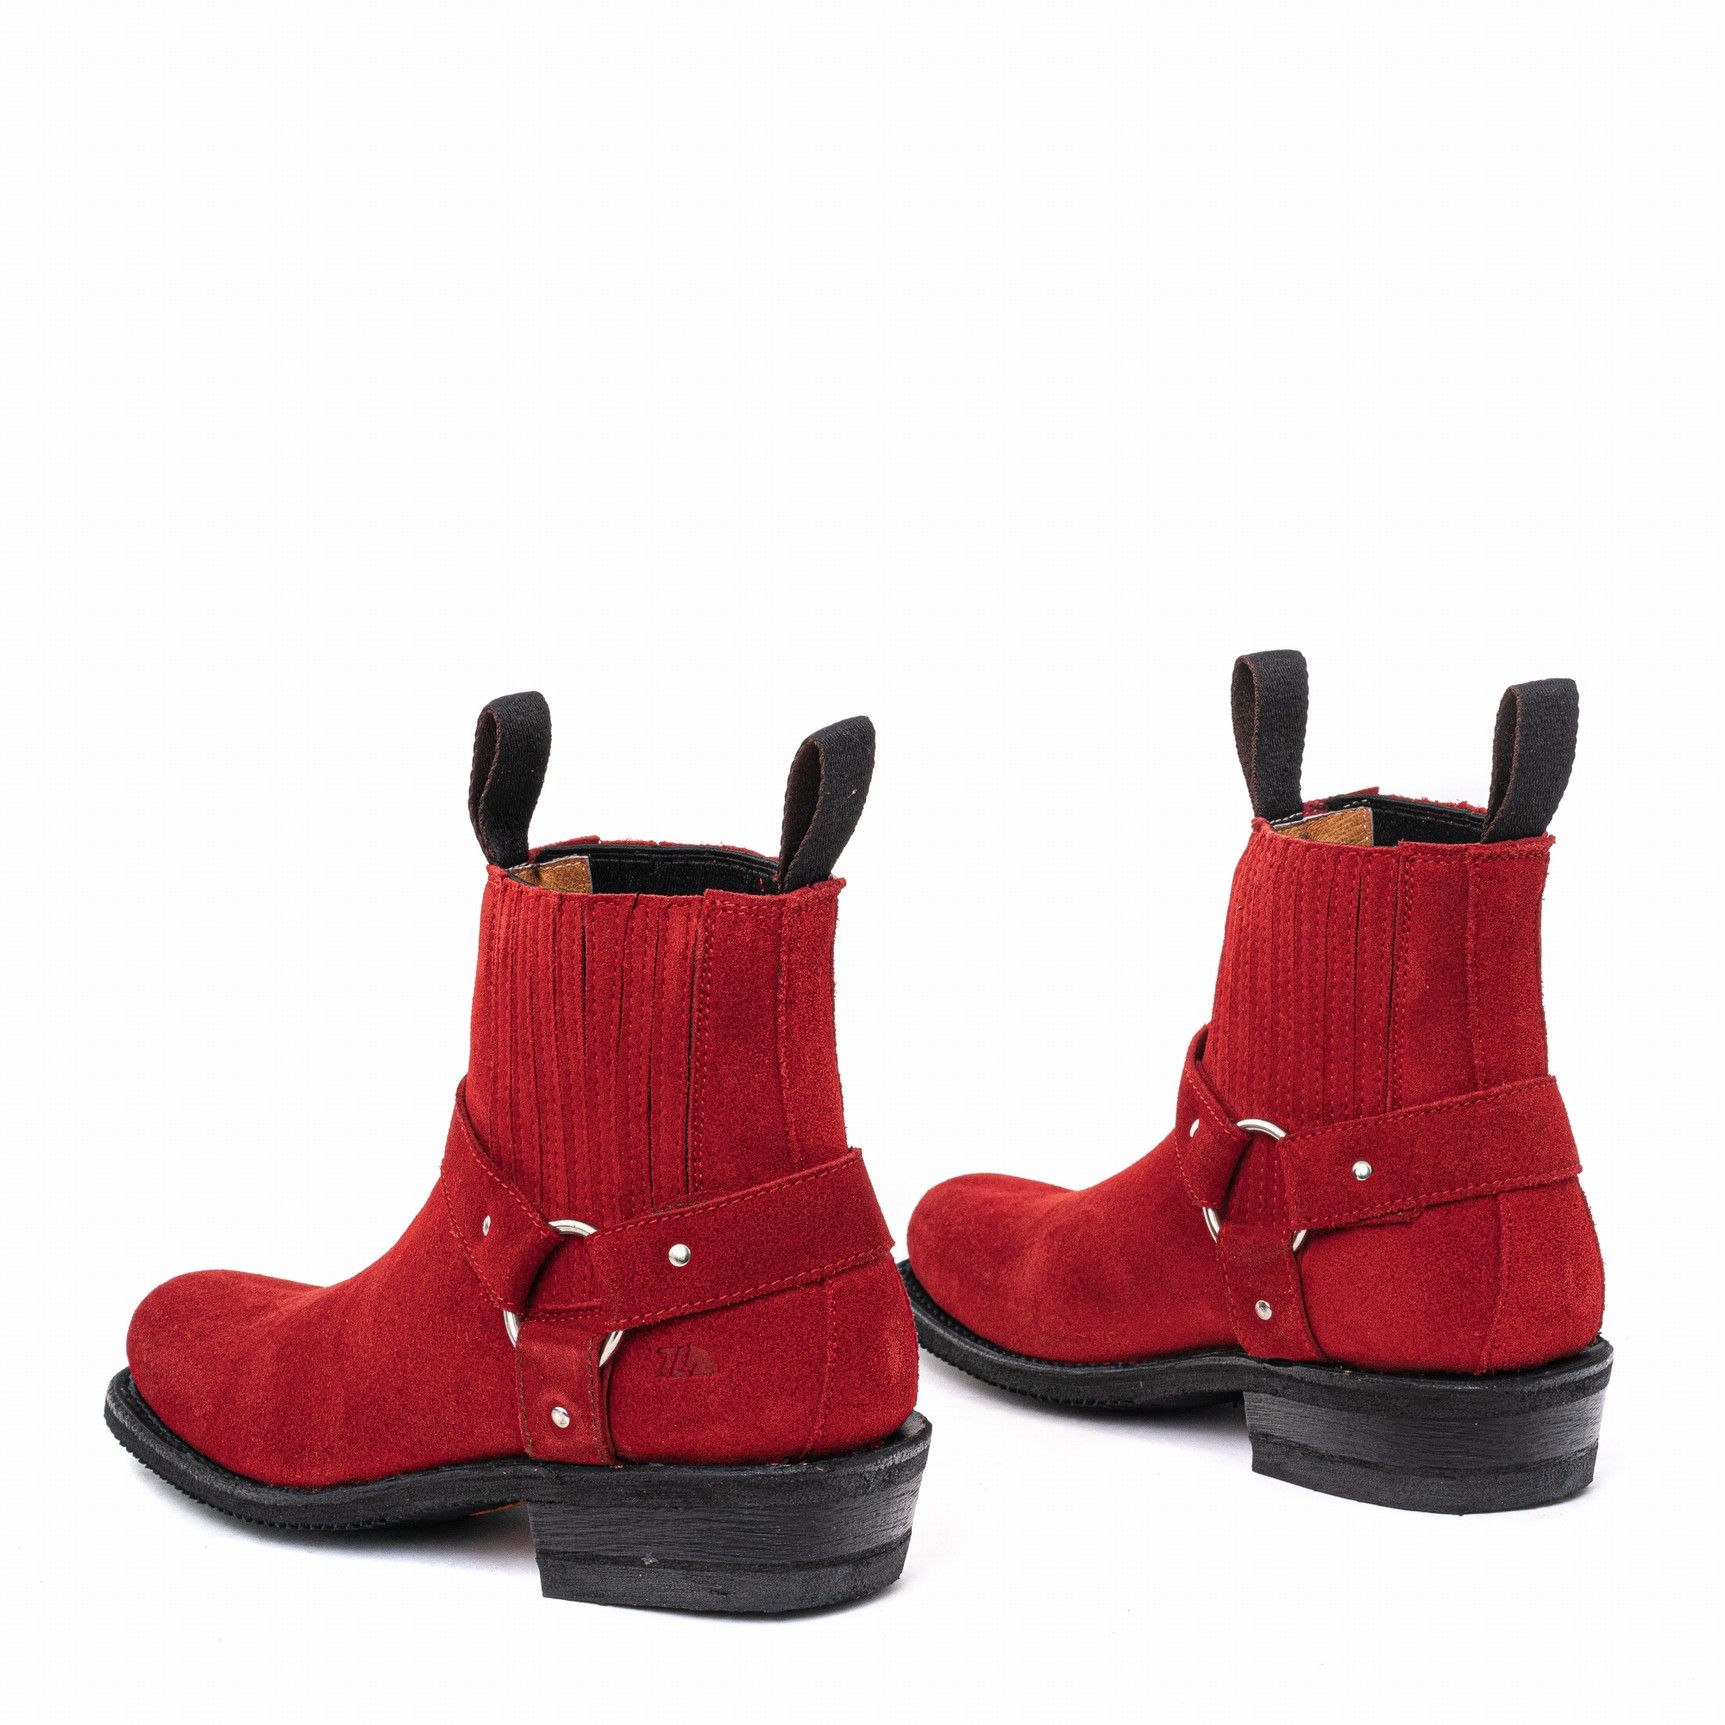 TOLTECA BOOTS GAMUZA ROJA THIS STYLE RUNS SMALL, ORDER 1 SIZE UP THAN YOUR USUAL SIZE        SQUARE TOE BOOTIES WITH LEATHER STR